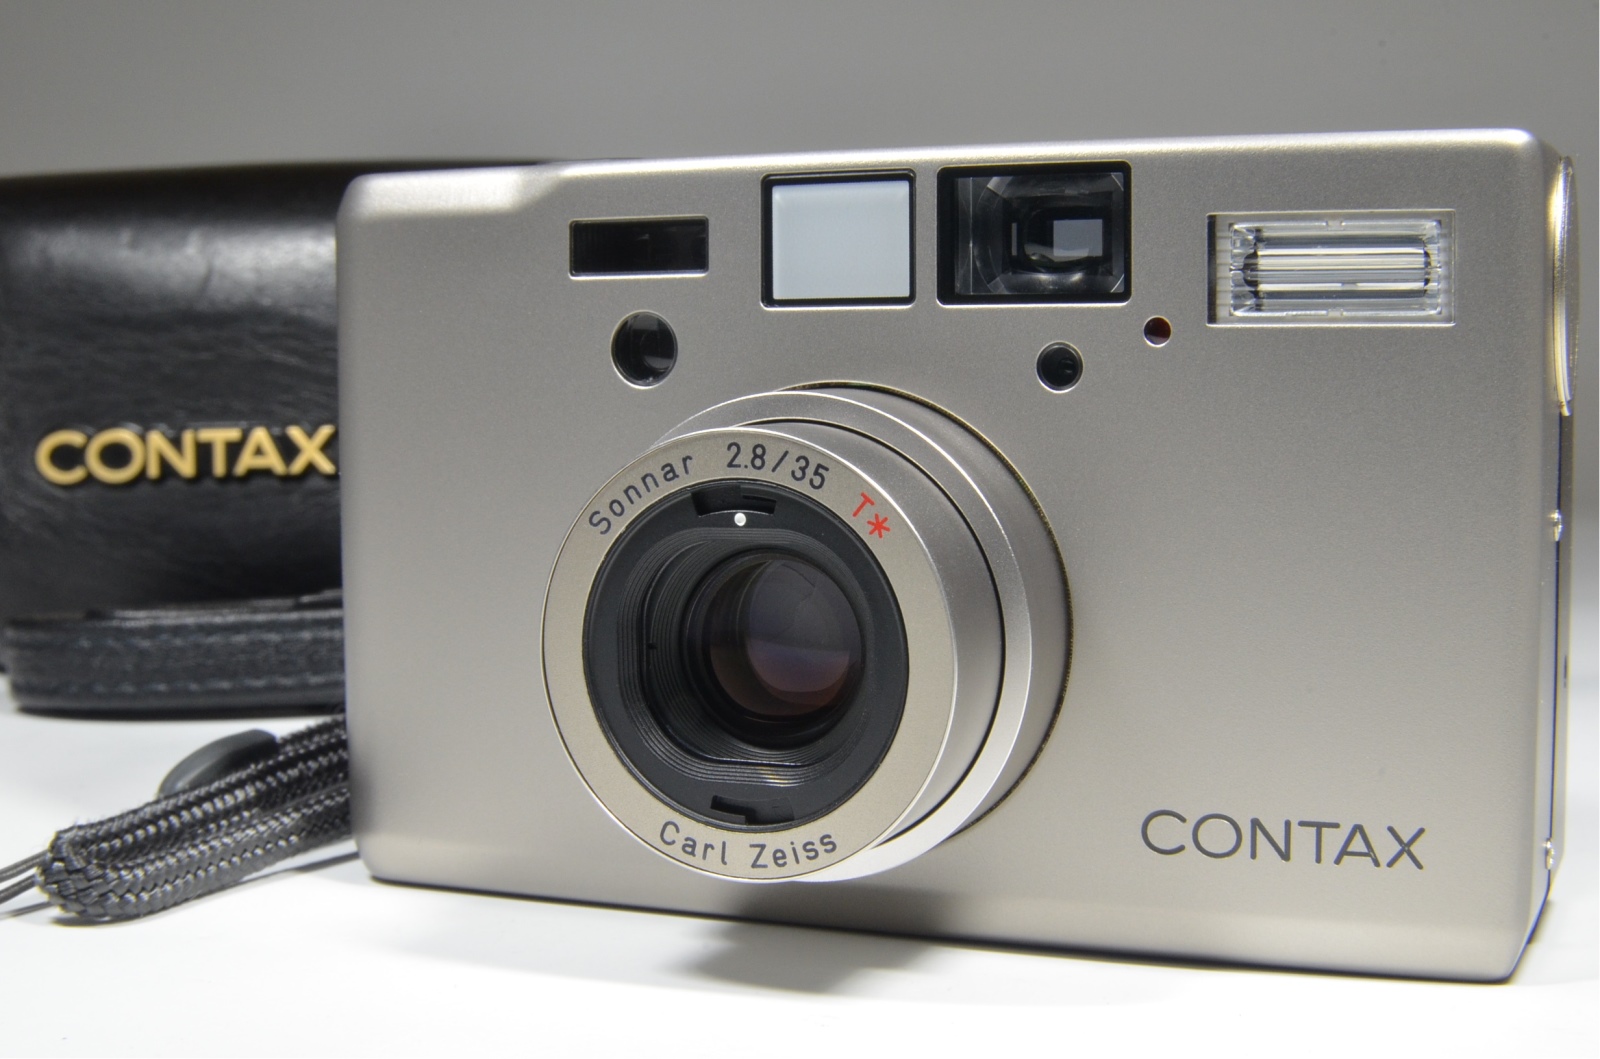 contax t3 data back p&s 35mm film camera with full leather case